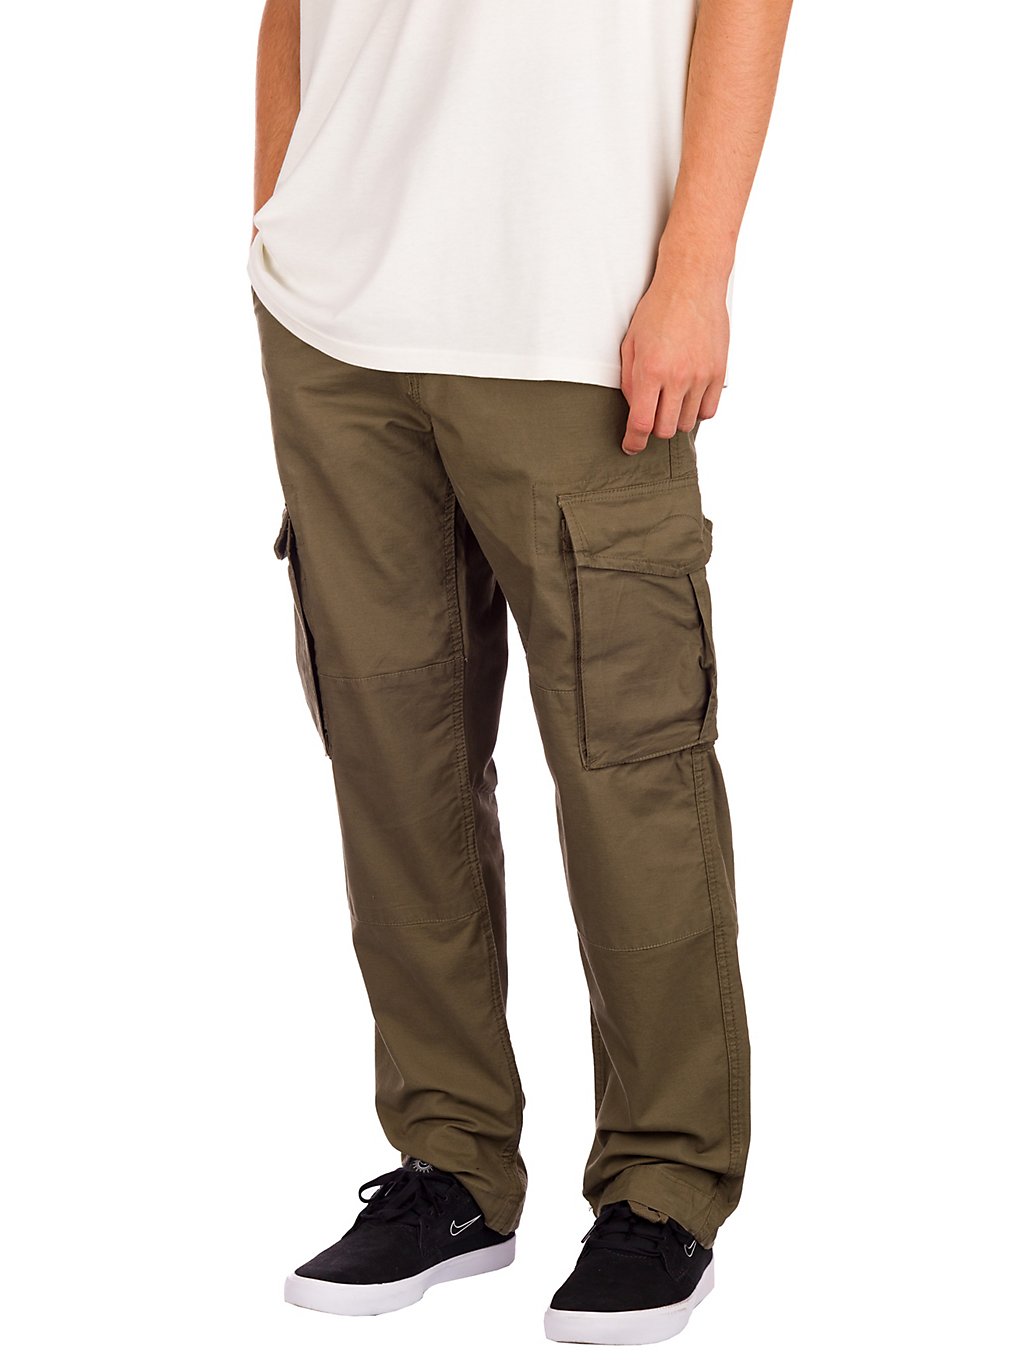 REELL Flex Cargo Lc Pants clay olive kaufen